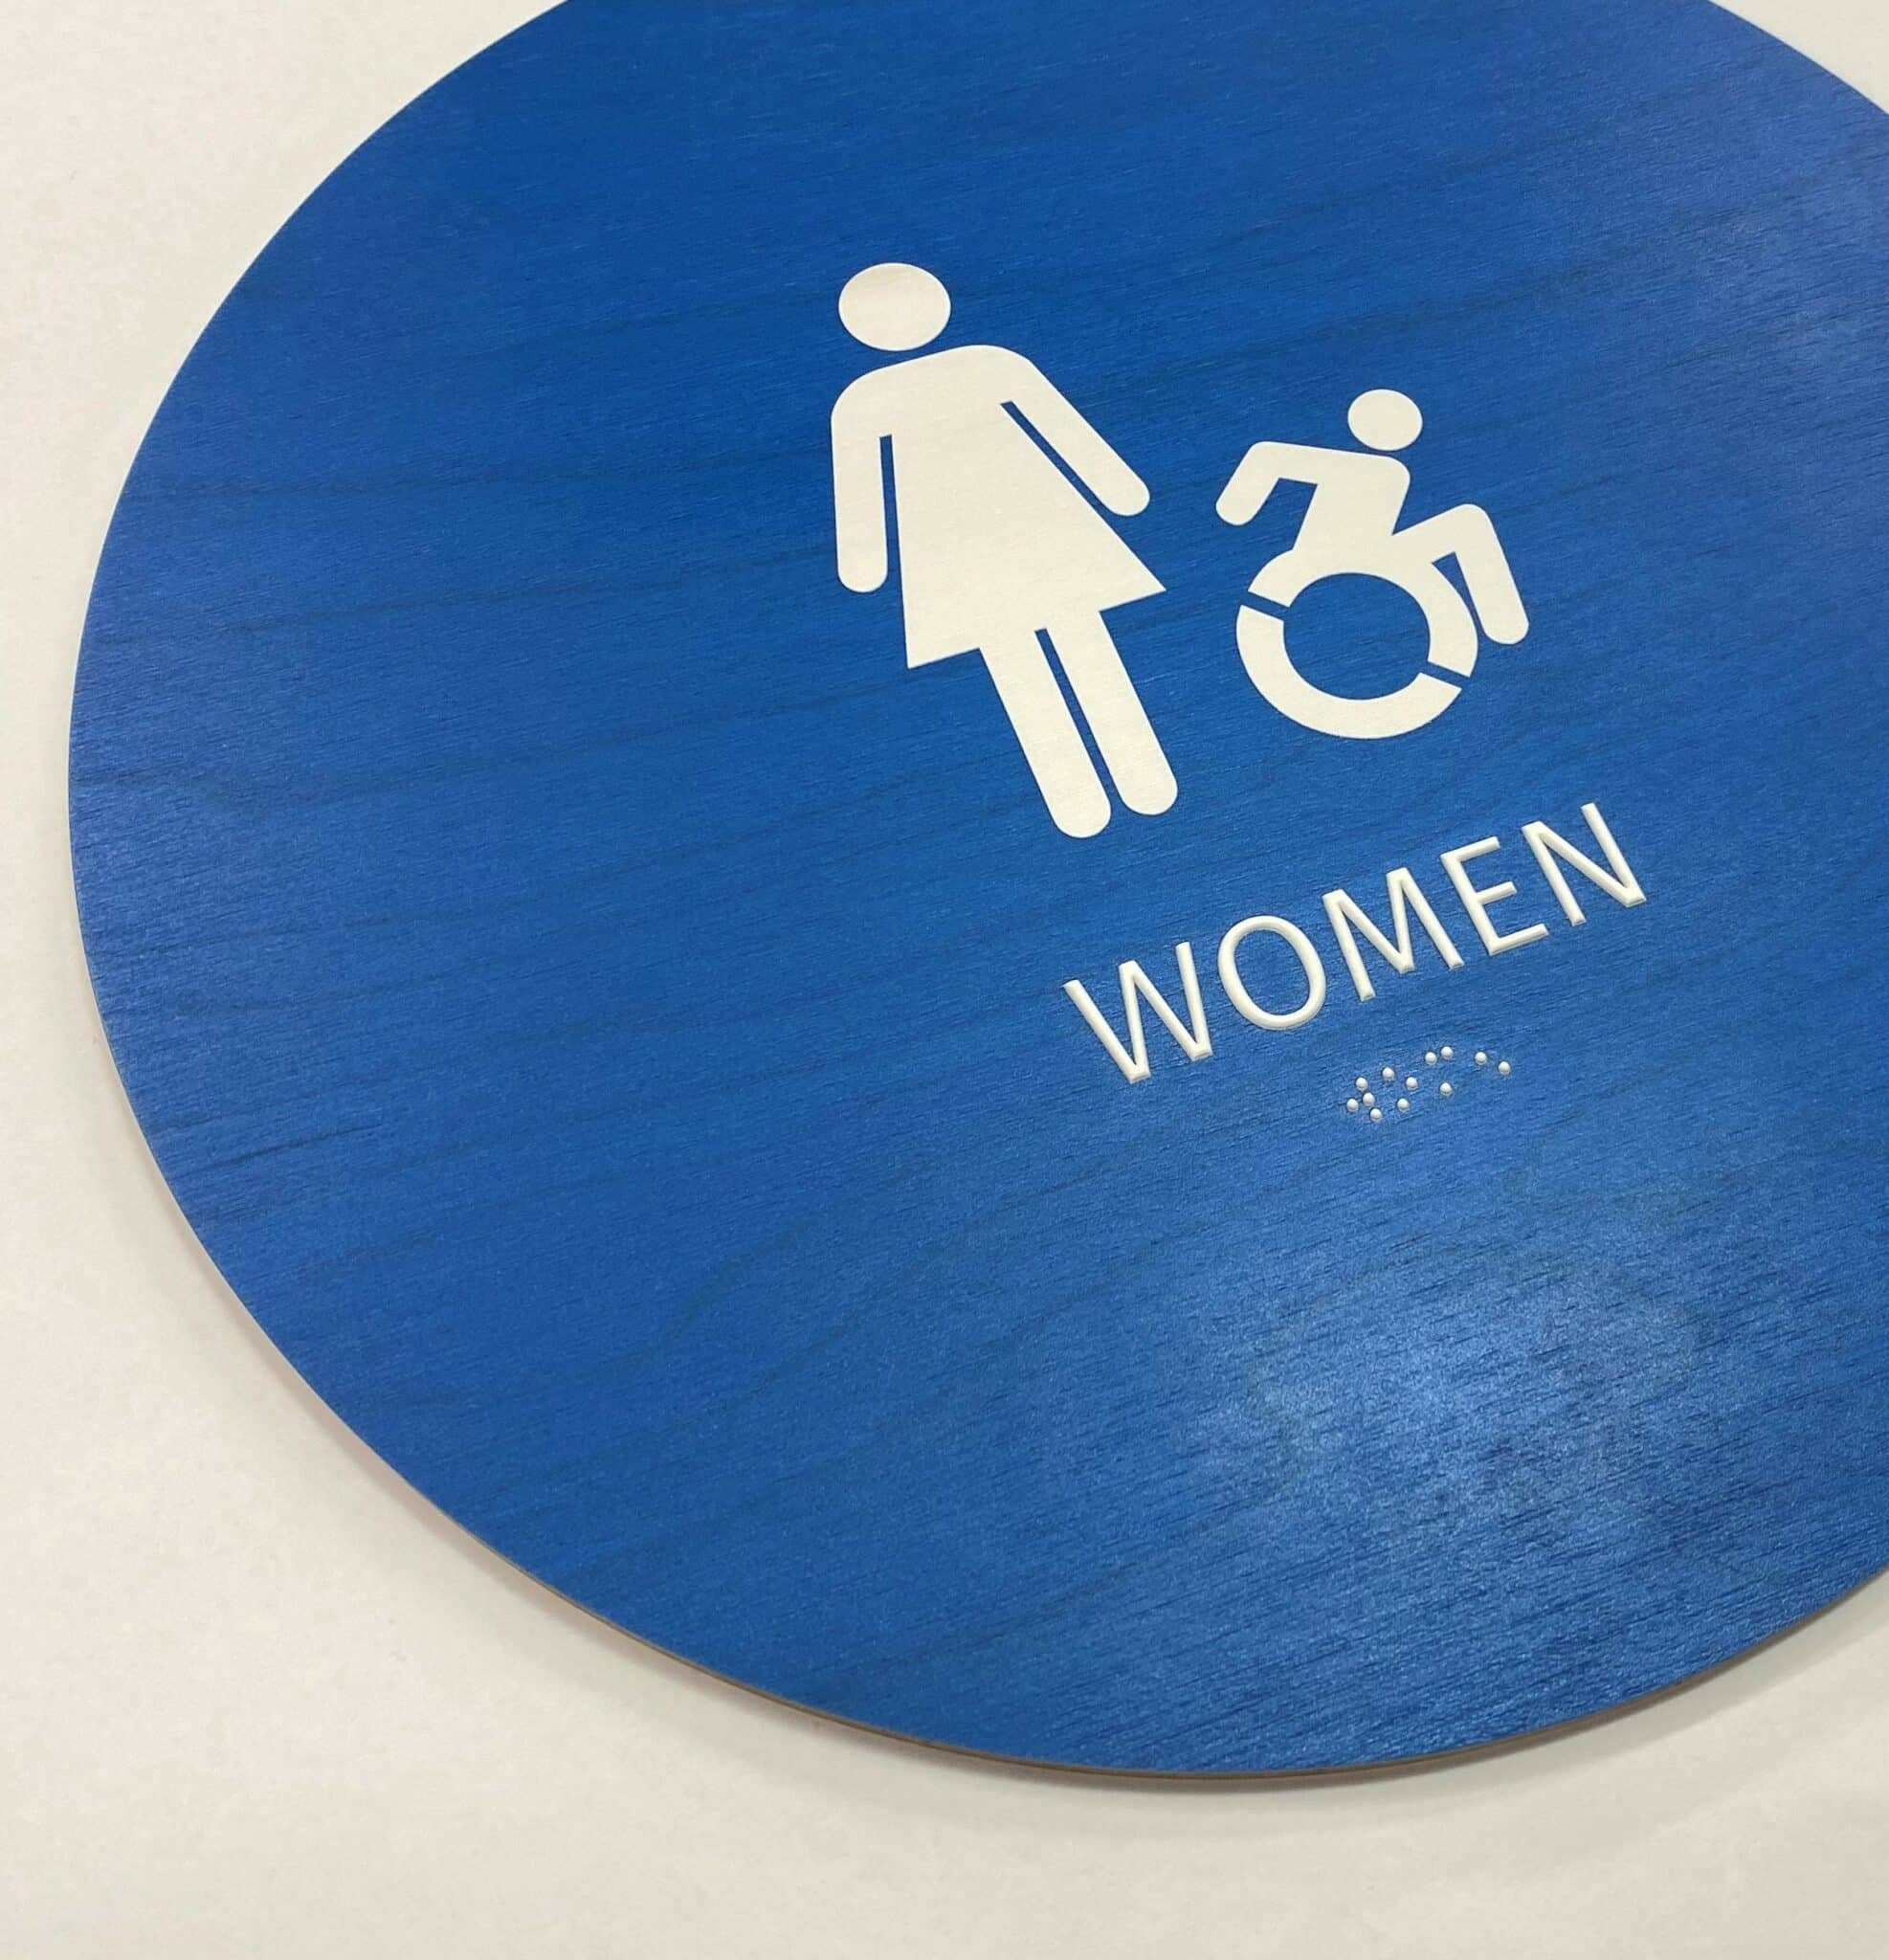 California Women's Accessible Restroom Sign